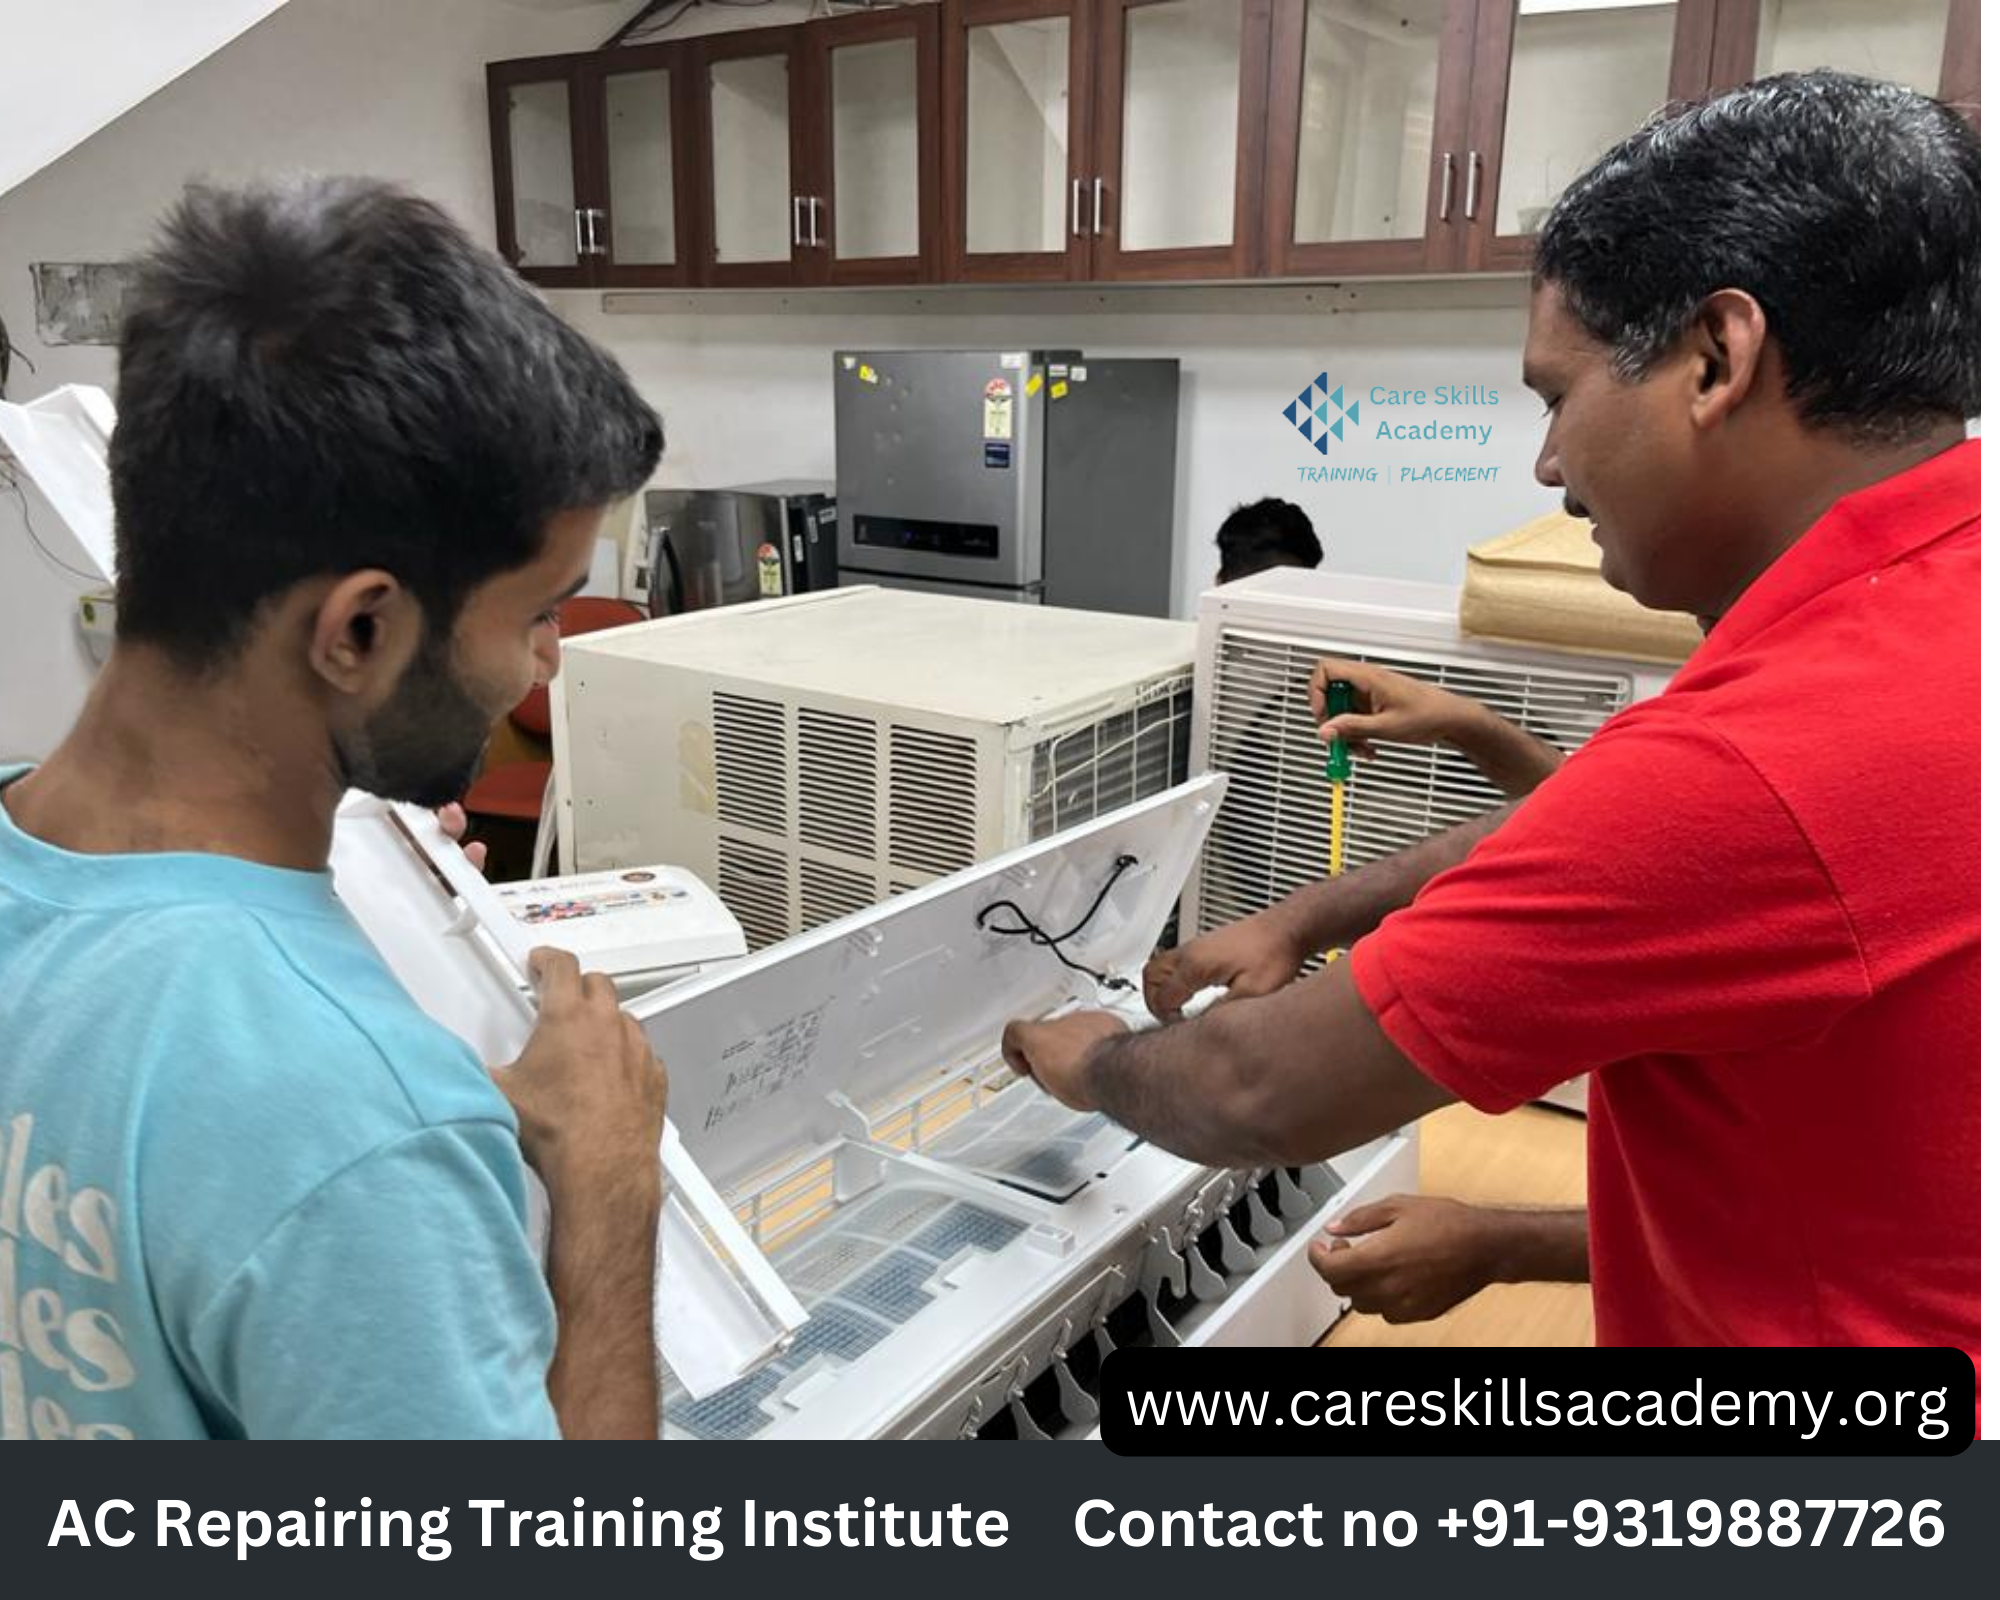 एसी रिपेयरिंग कोर्स || Looking to become an AC repair technician? Check out our new AC repairing course in Hindi!